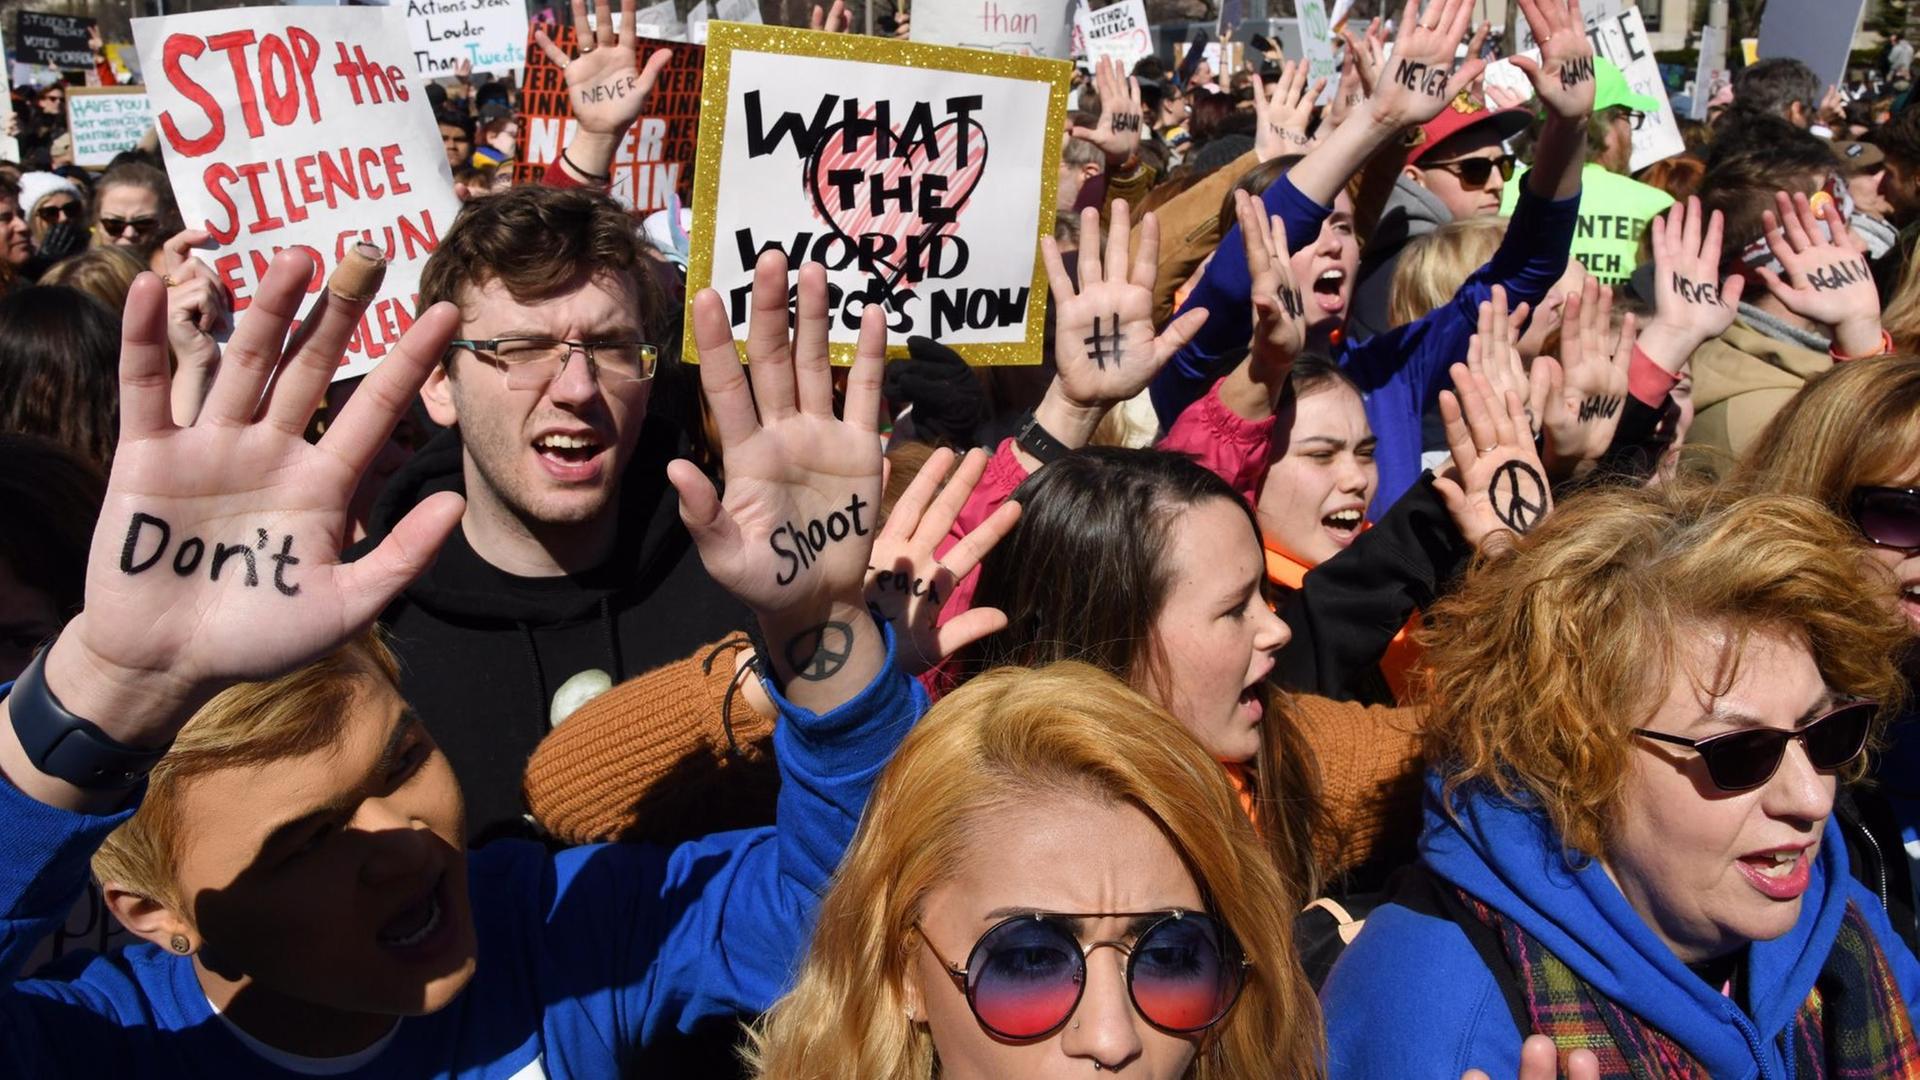 "March for our lives" in Washington